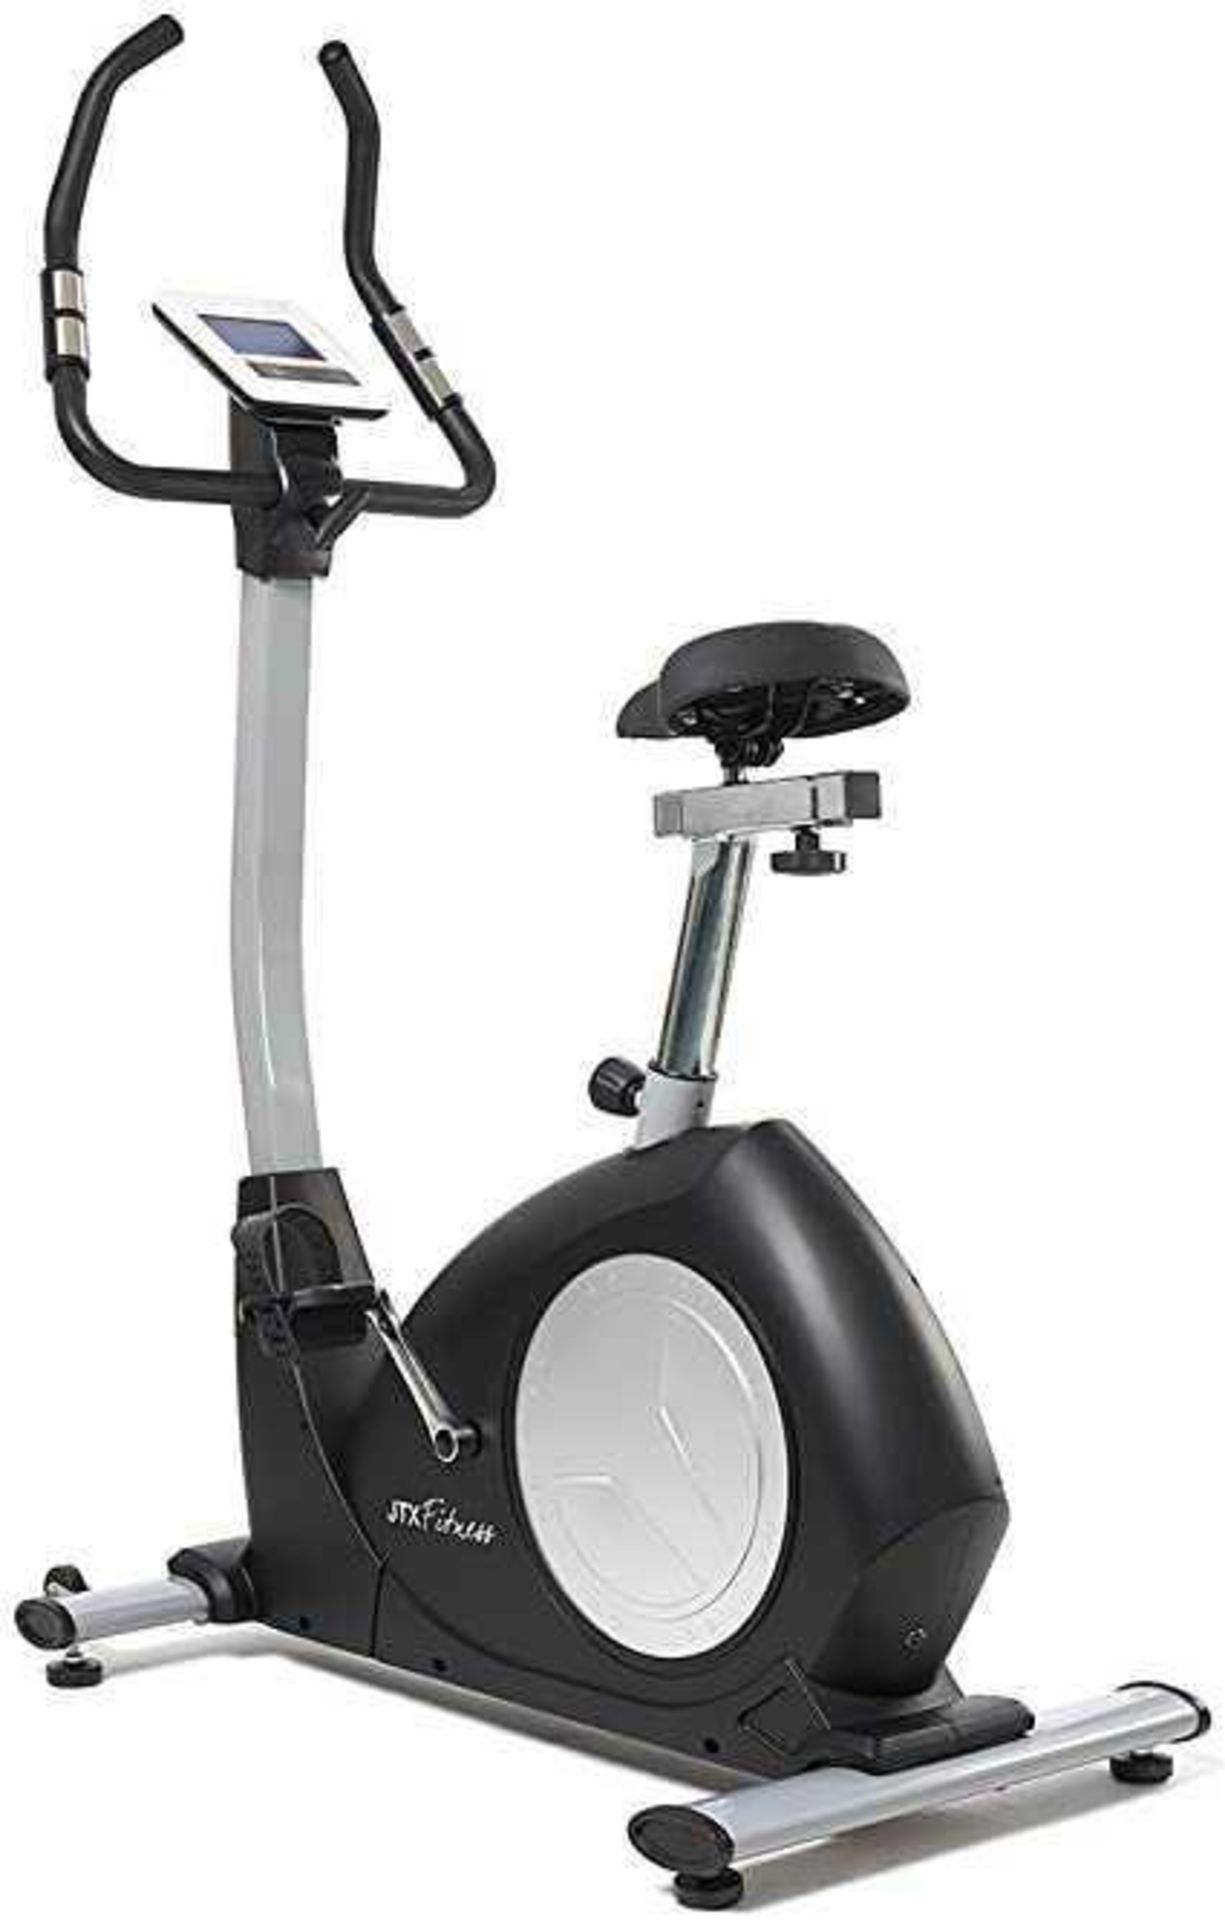 RRP £400 Unboxed Jtx Cycle-Go: Home Exercise Bike - Compact Upright Bike - 11Kg Flywheel - Full Colo